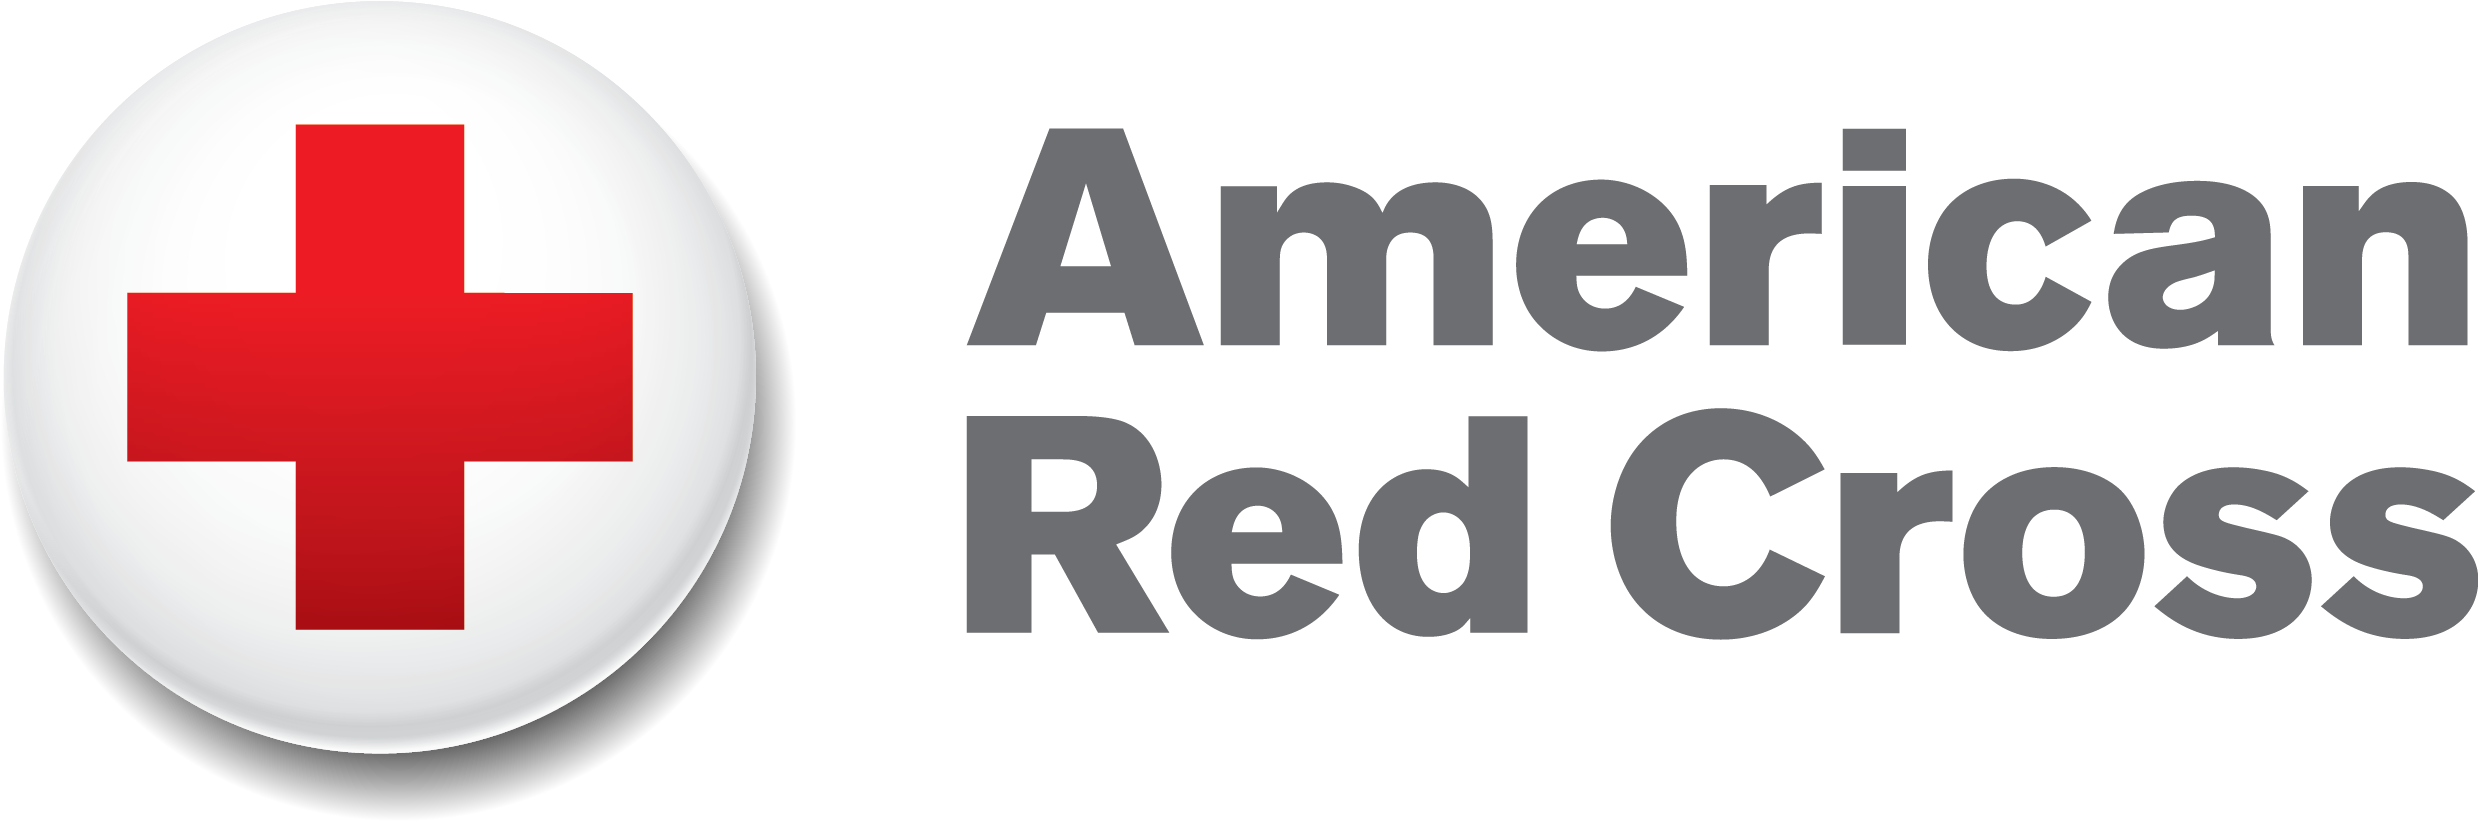 Red Cross Logo Arc Pdf Png Svg Download Logo Icons - American Red Cross Png (2506x863)